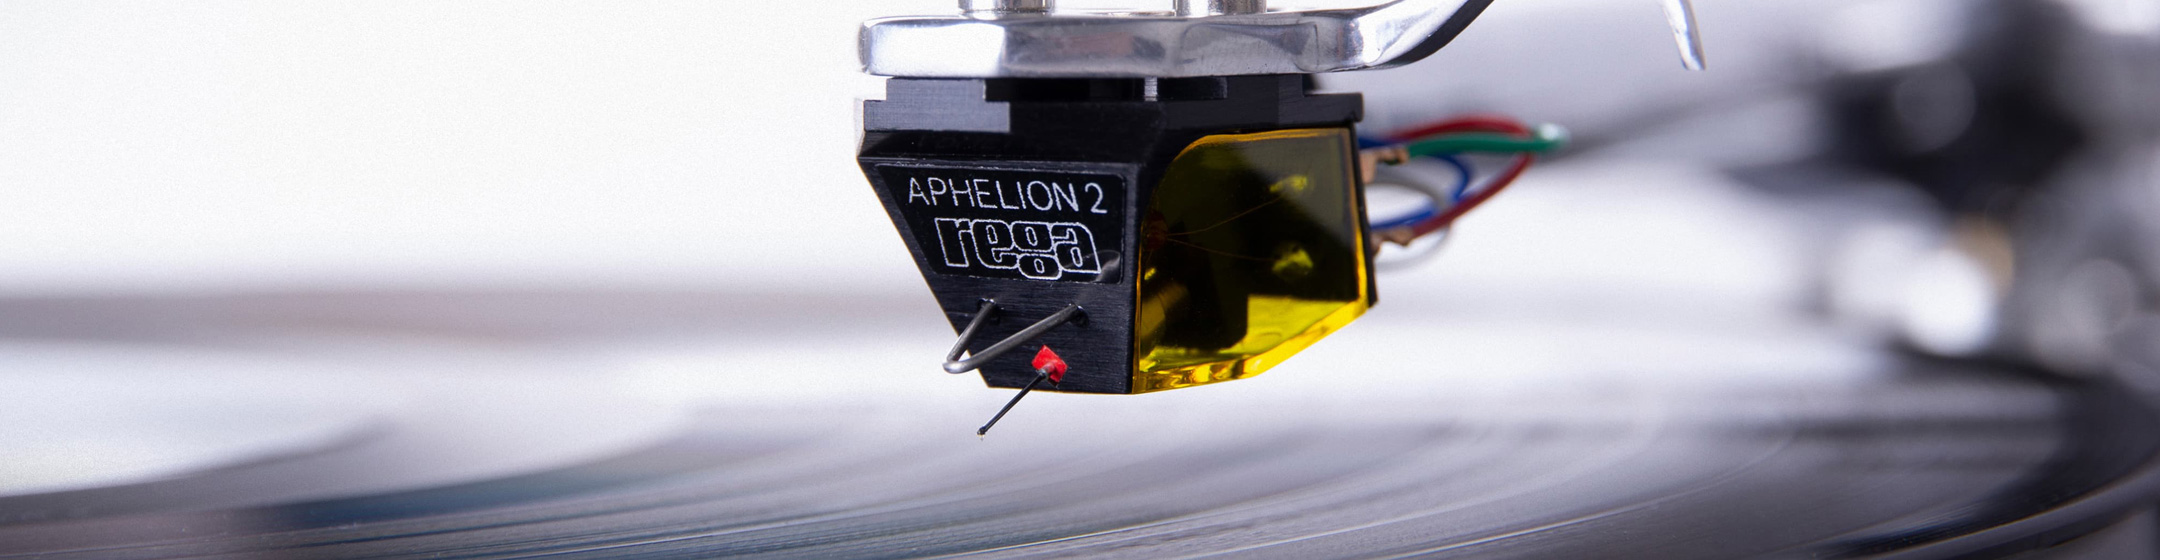 Pic showing a Rega Aphelion 2 stylus hovering over a vinyl record